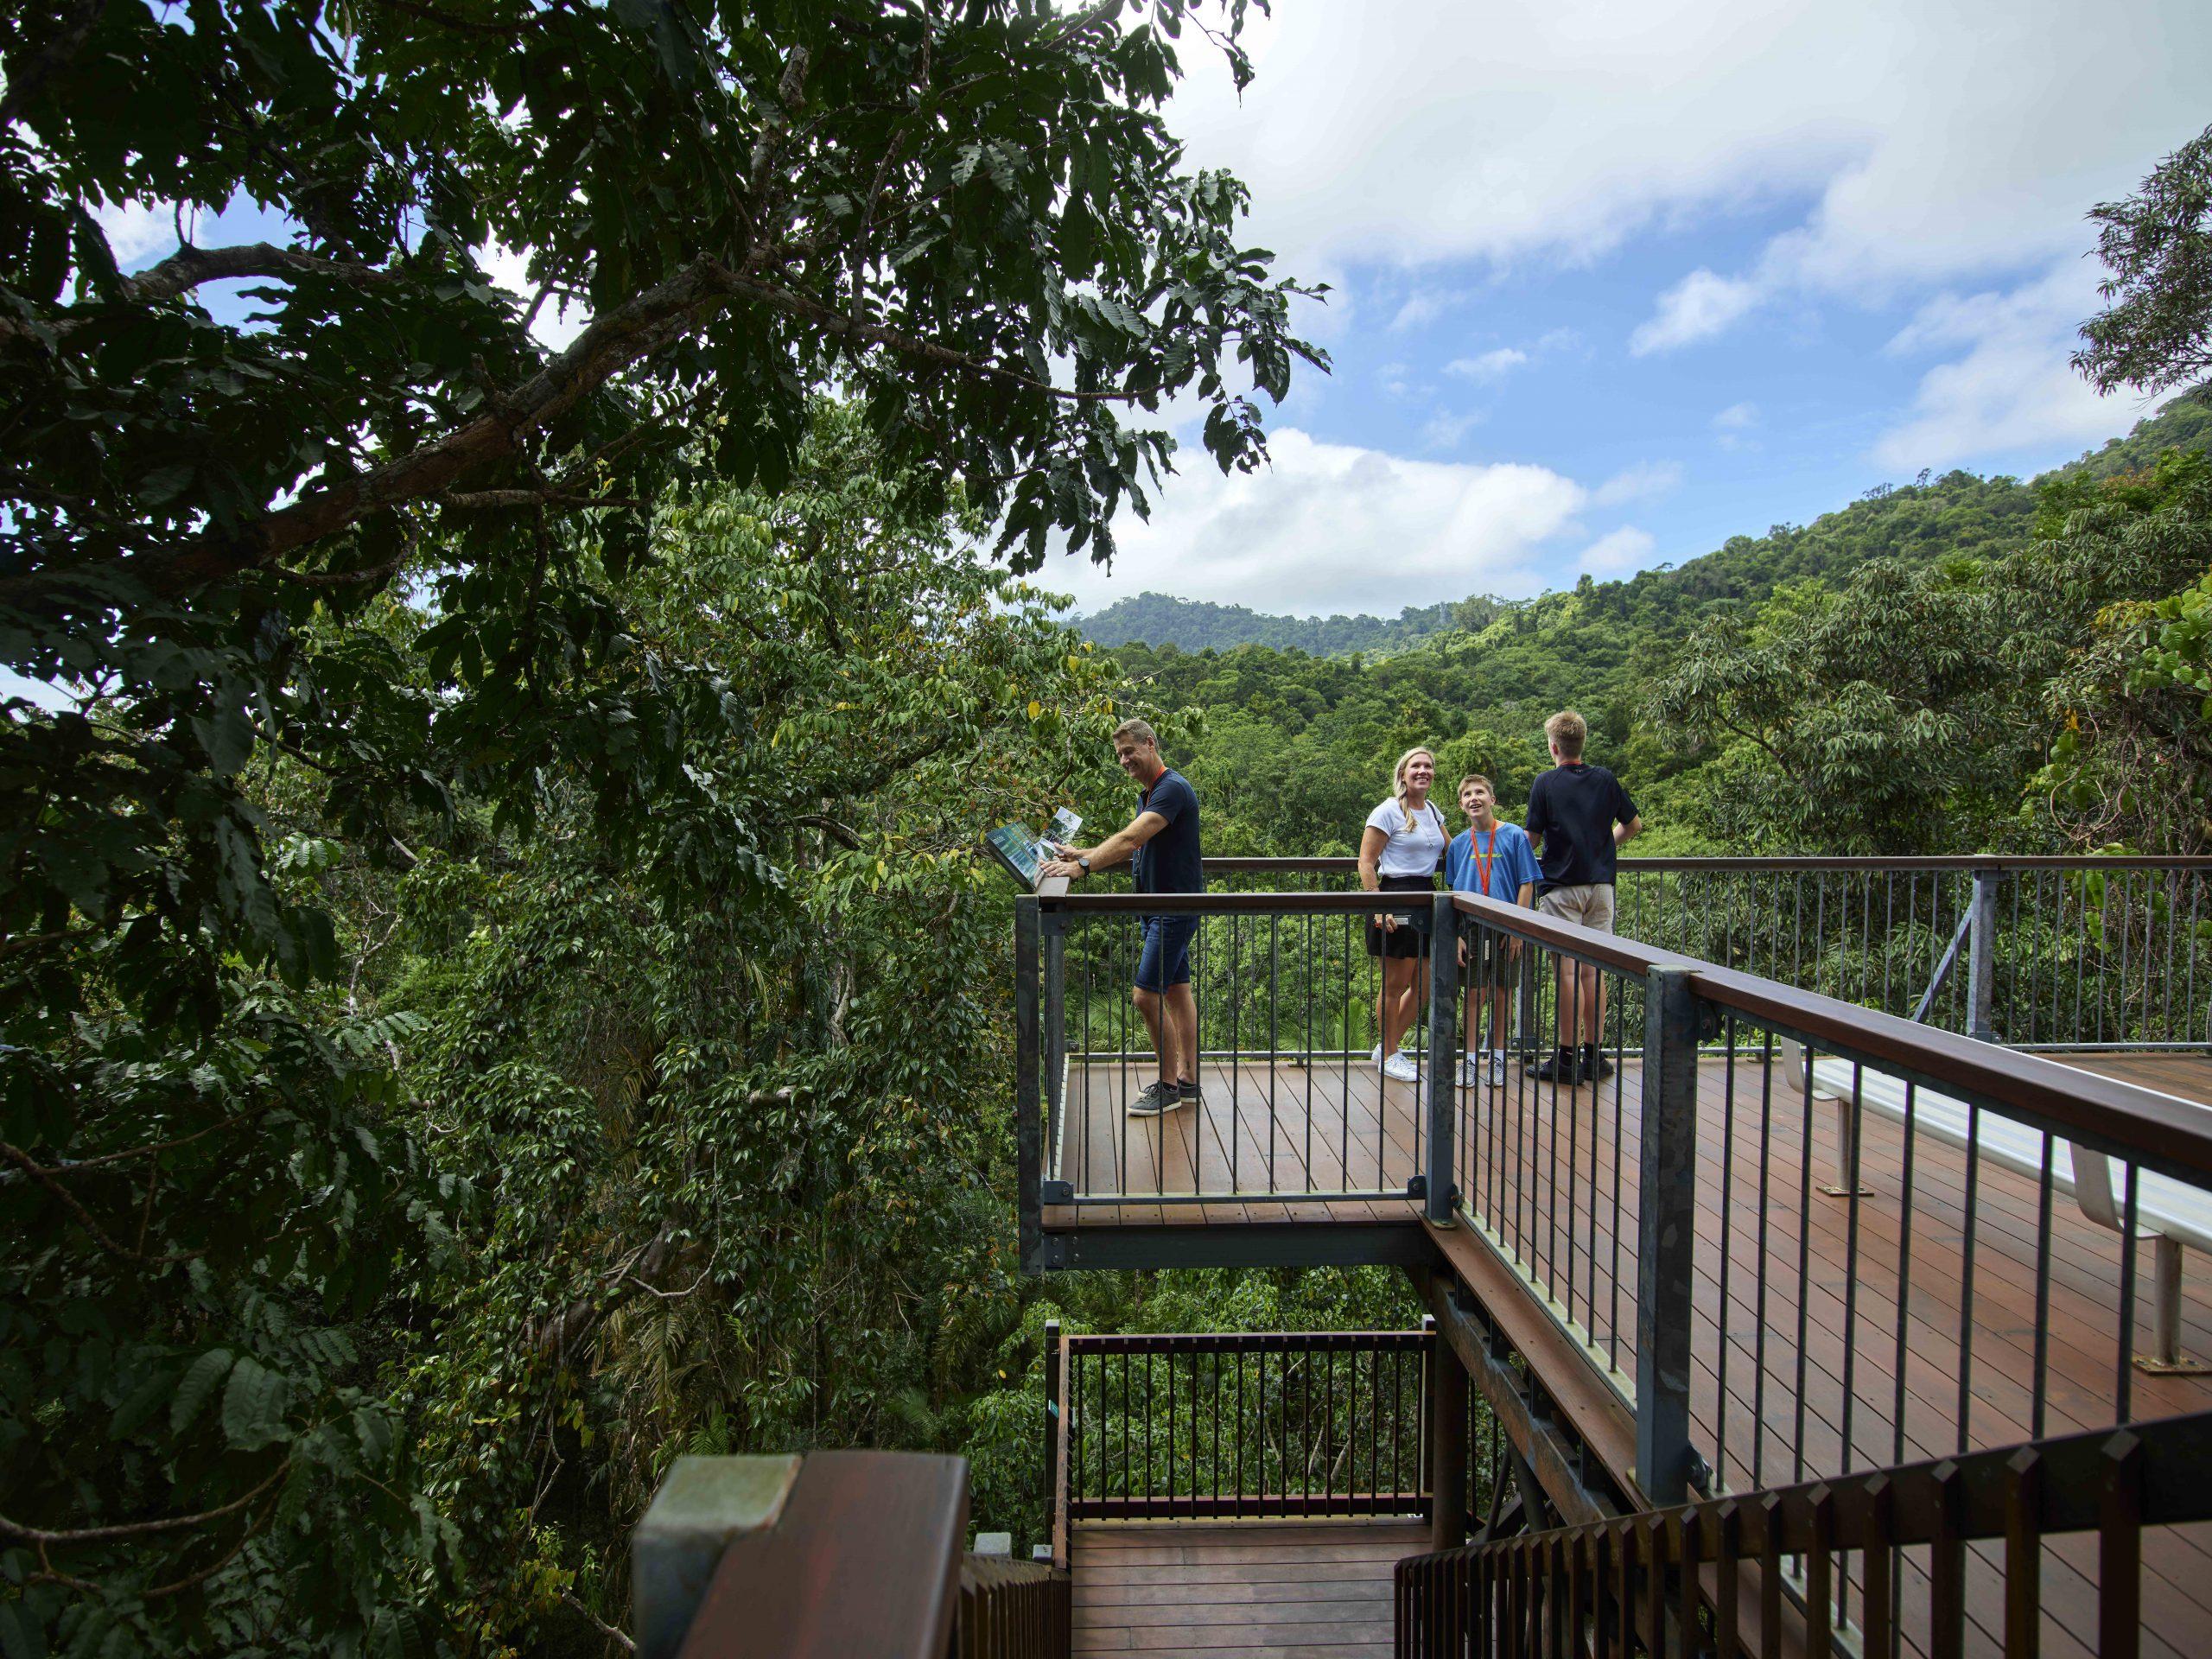 daintree discovery centre tours